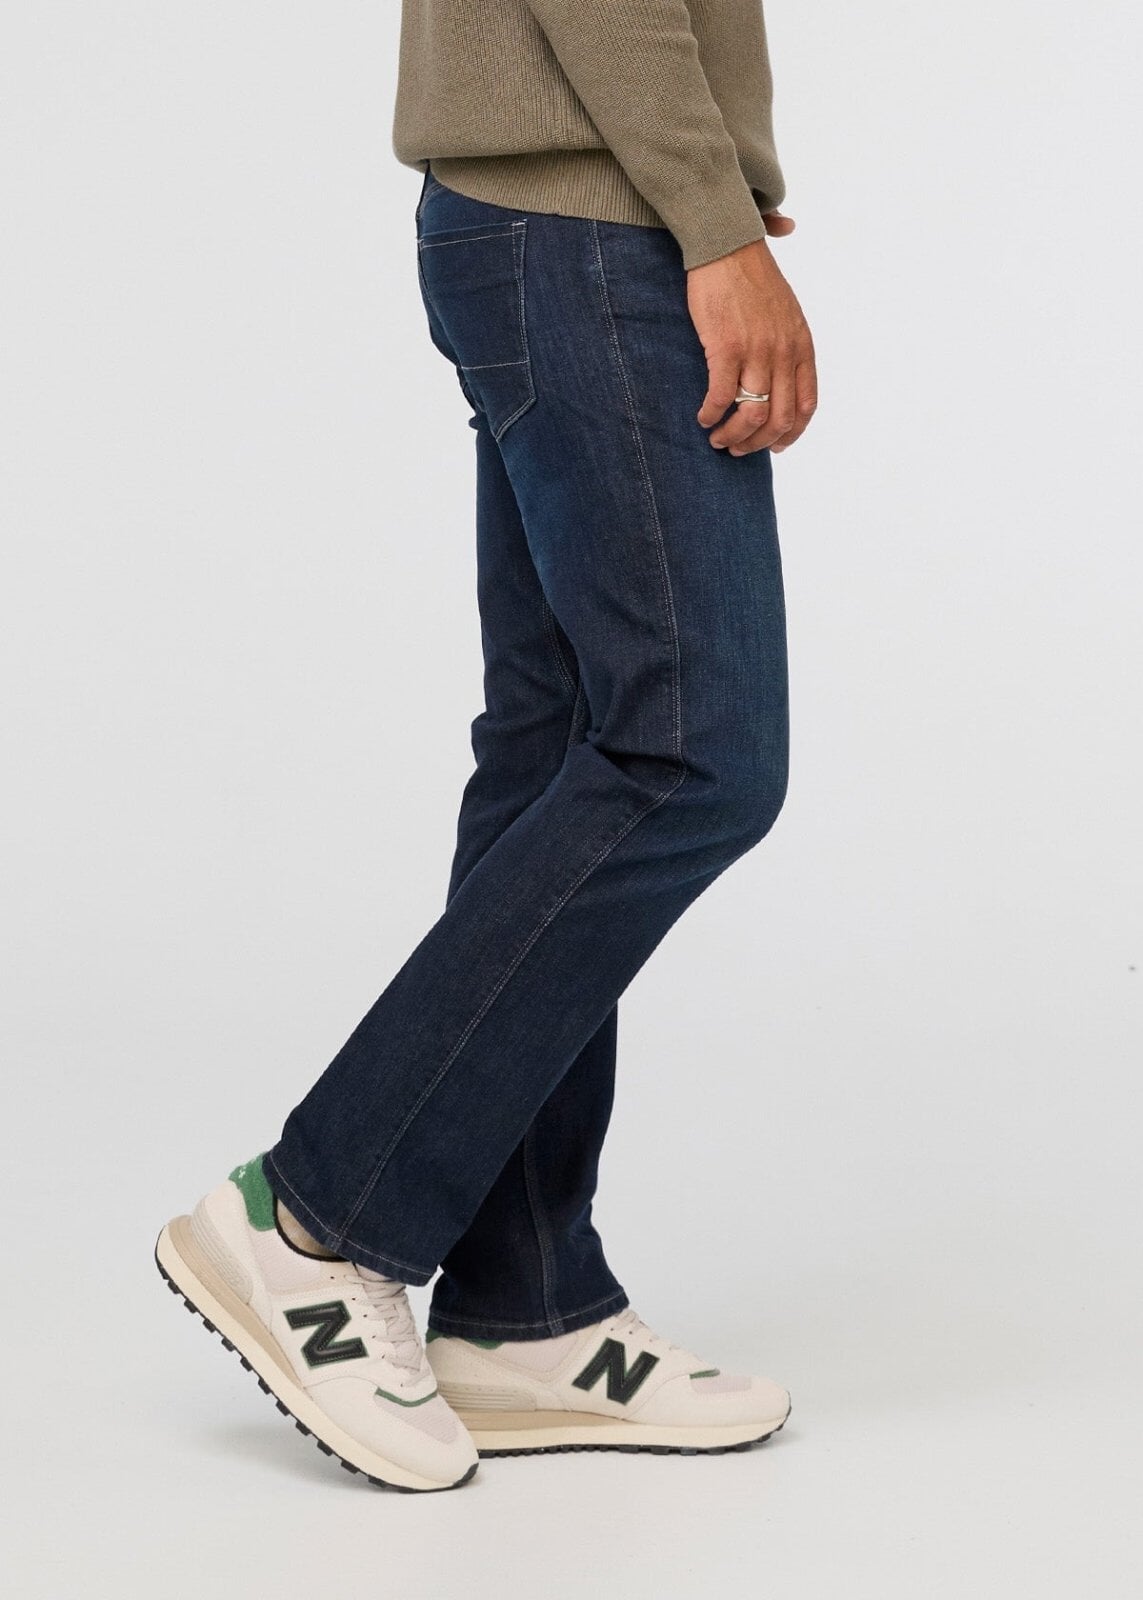 Men's Straight Fit Stretch Jeans